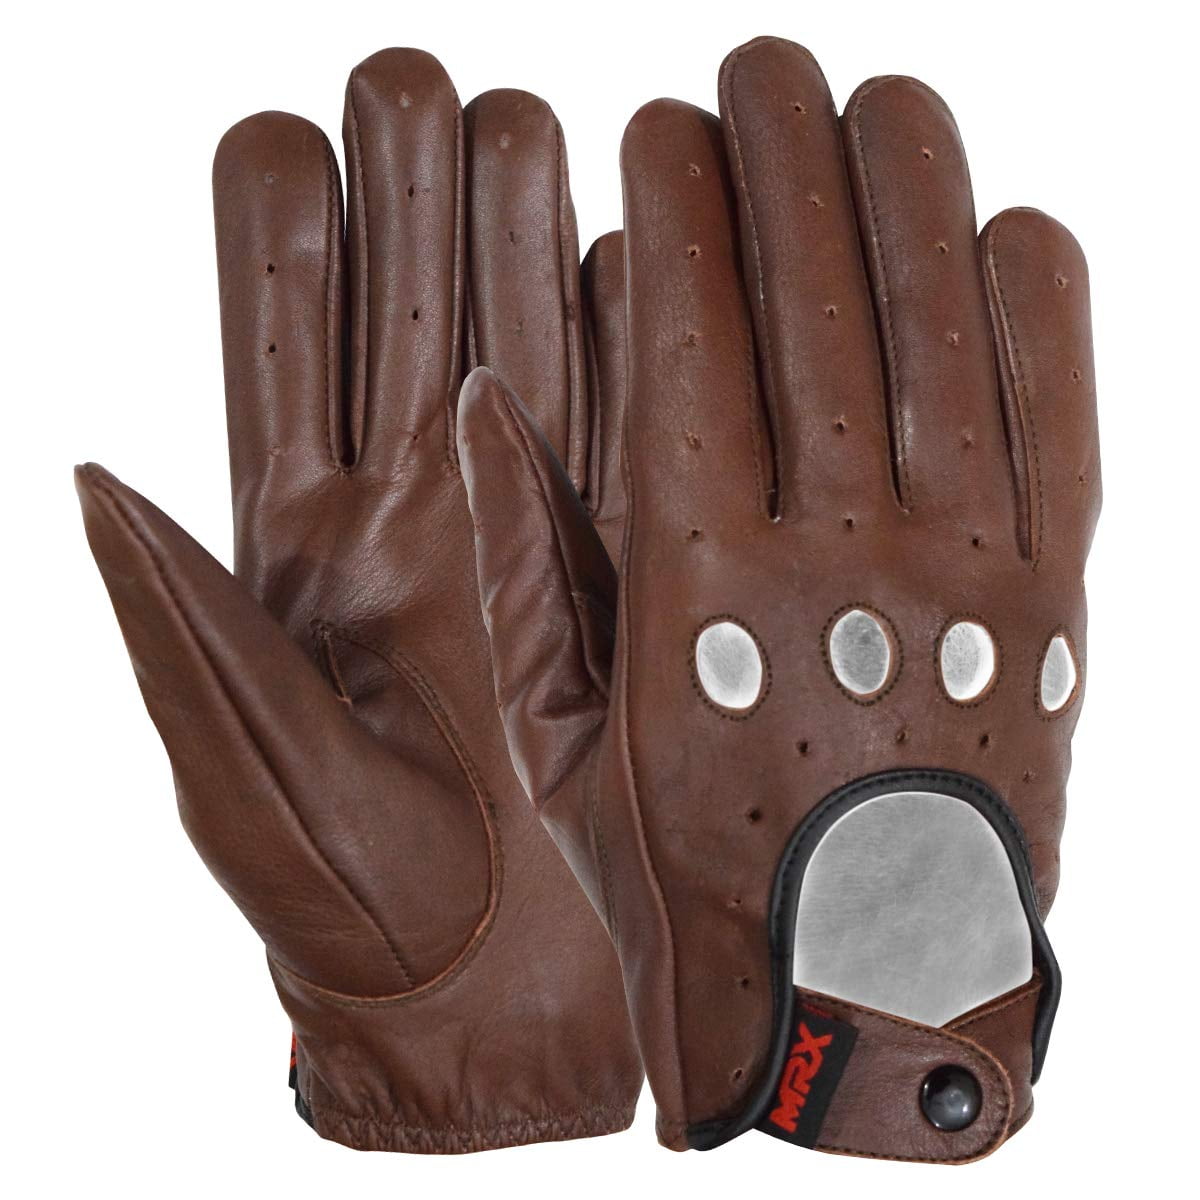 CHAUFFEUR DRIVING GLOVES GENUINE SOFT LEATHER GLOVE VINTAGE CLASSIC RETRO STYLE 